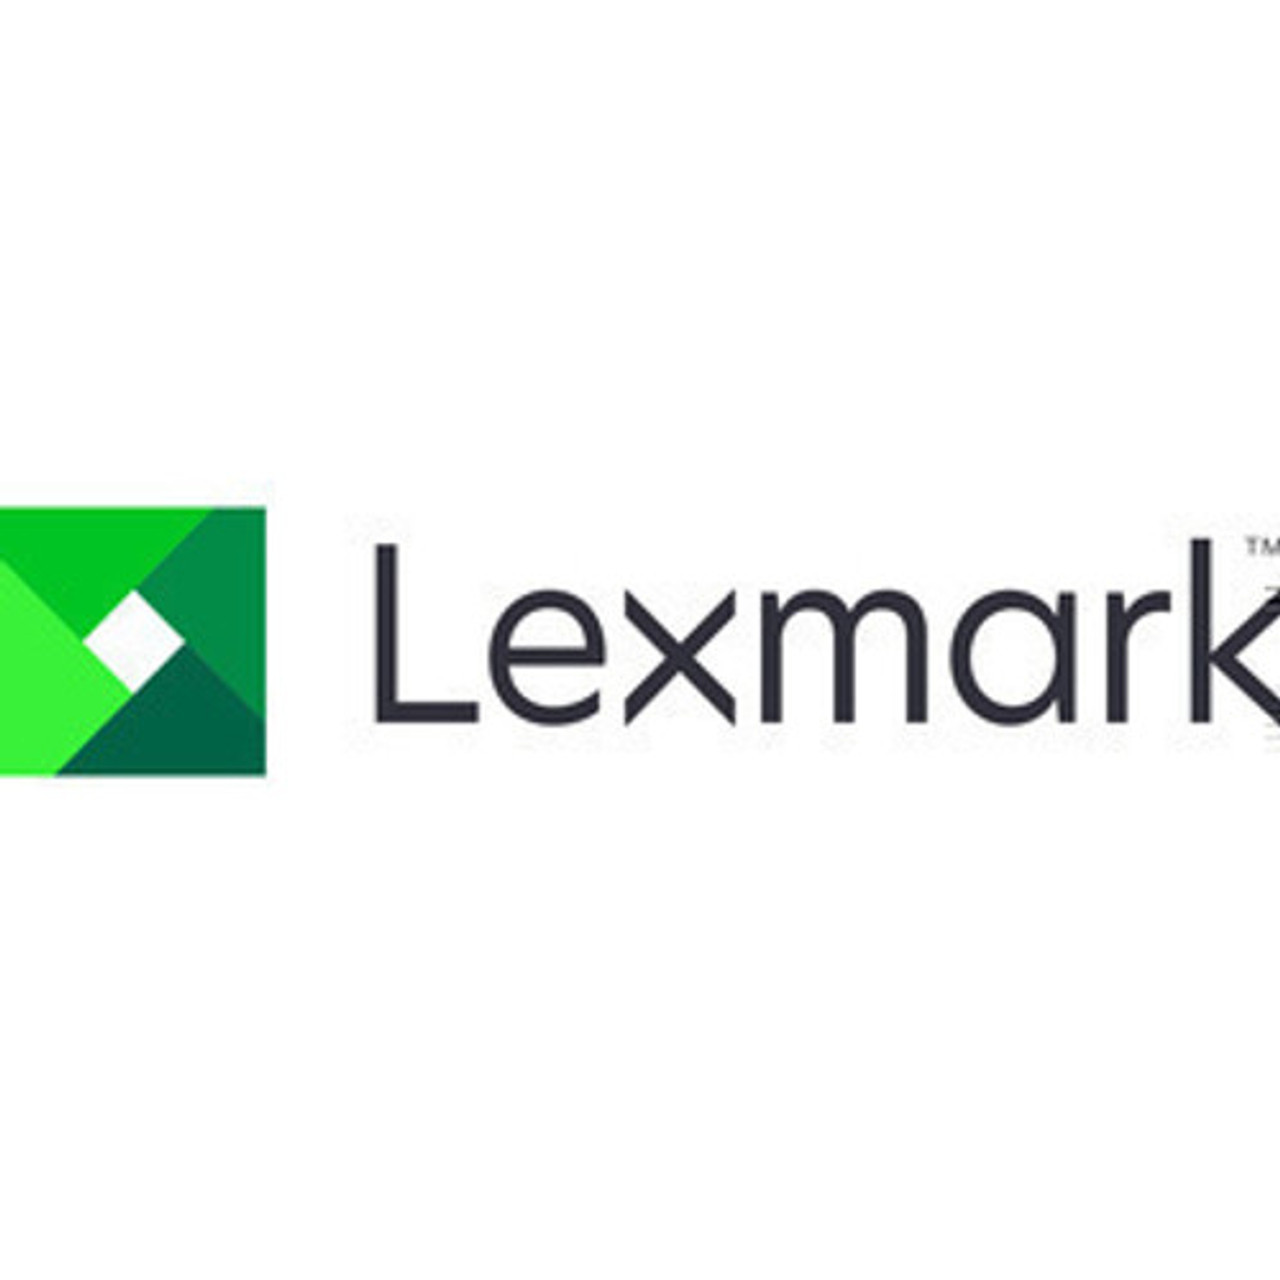 Lexmark 2 Year Parts Only - MS431 - 2371887